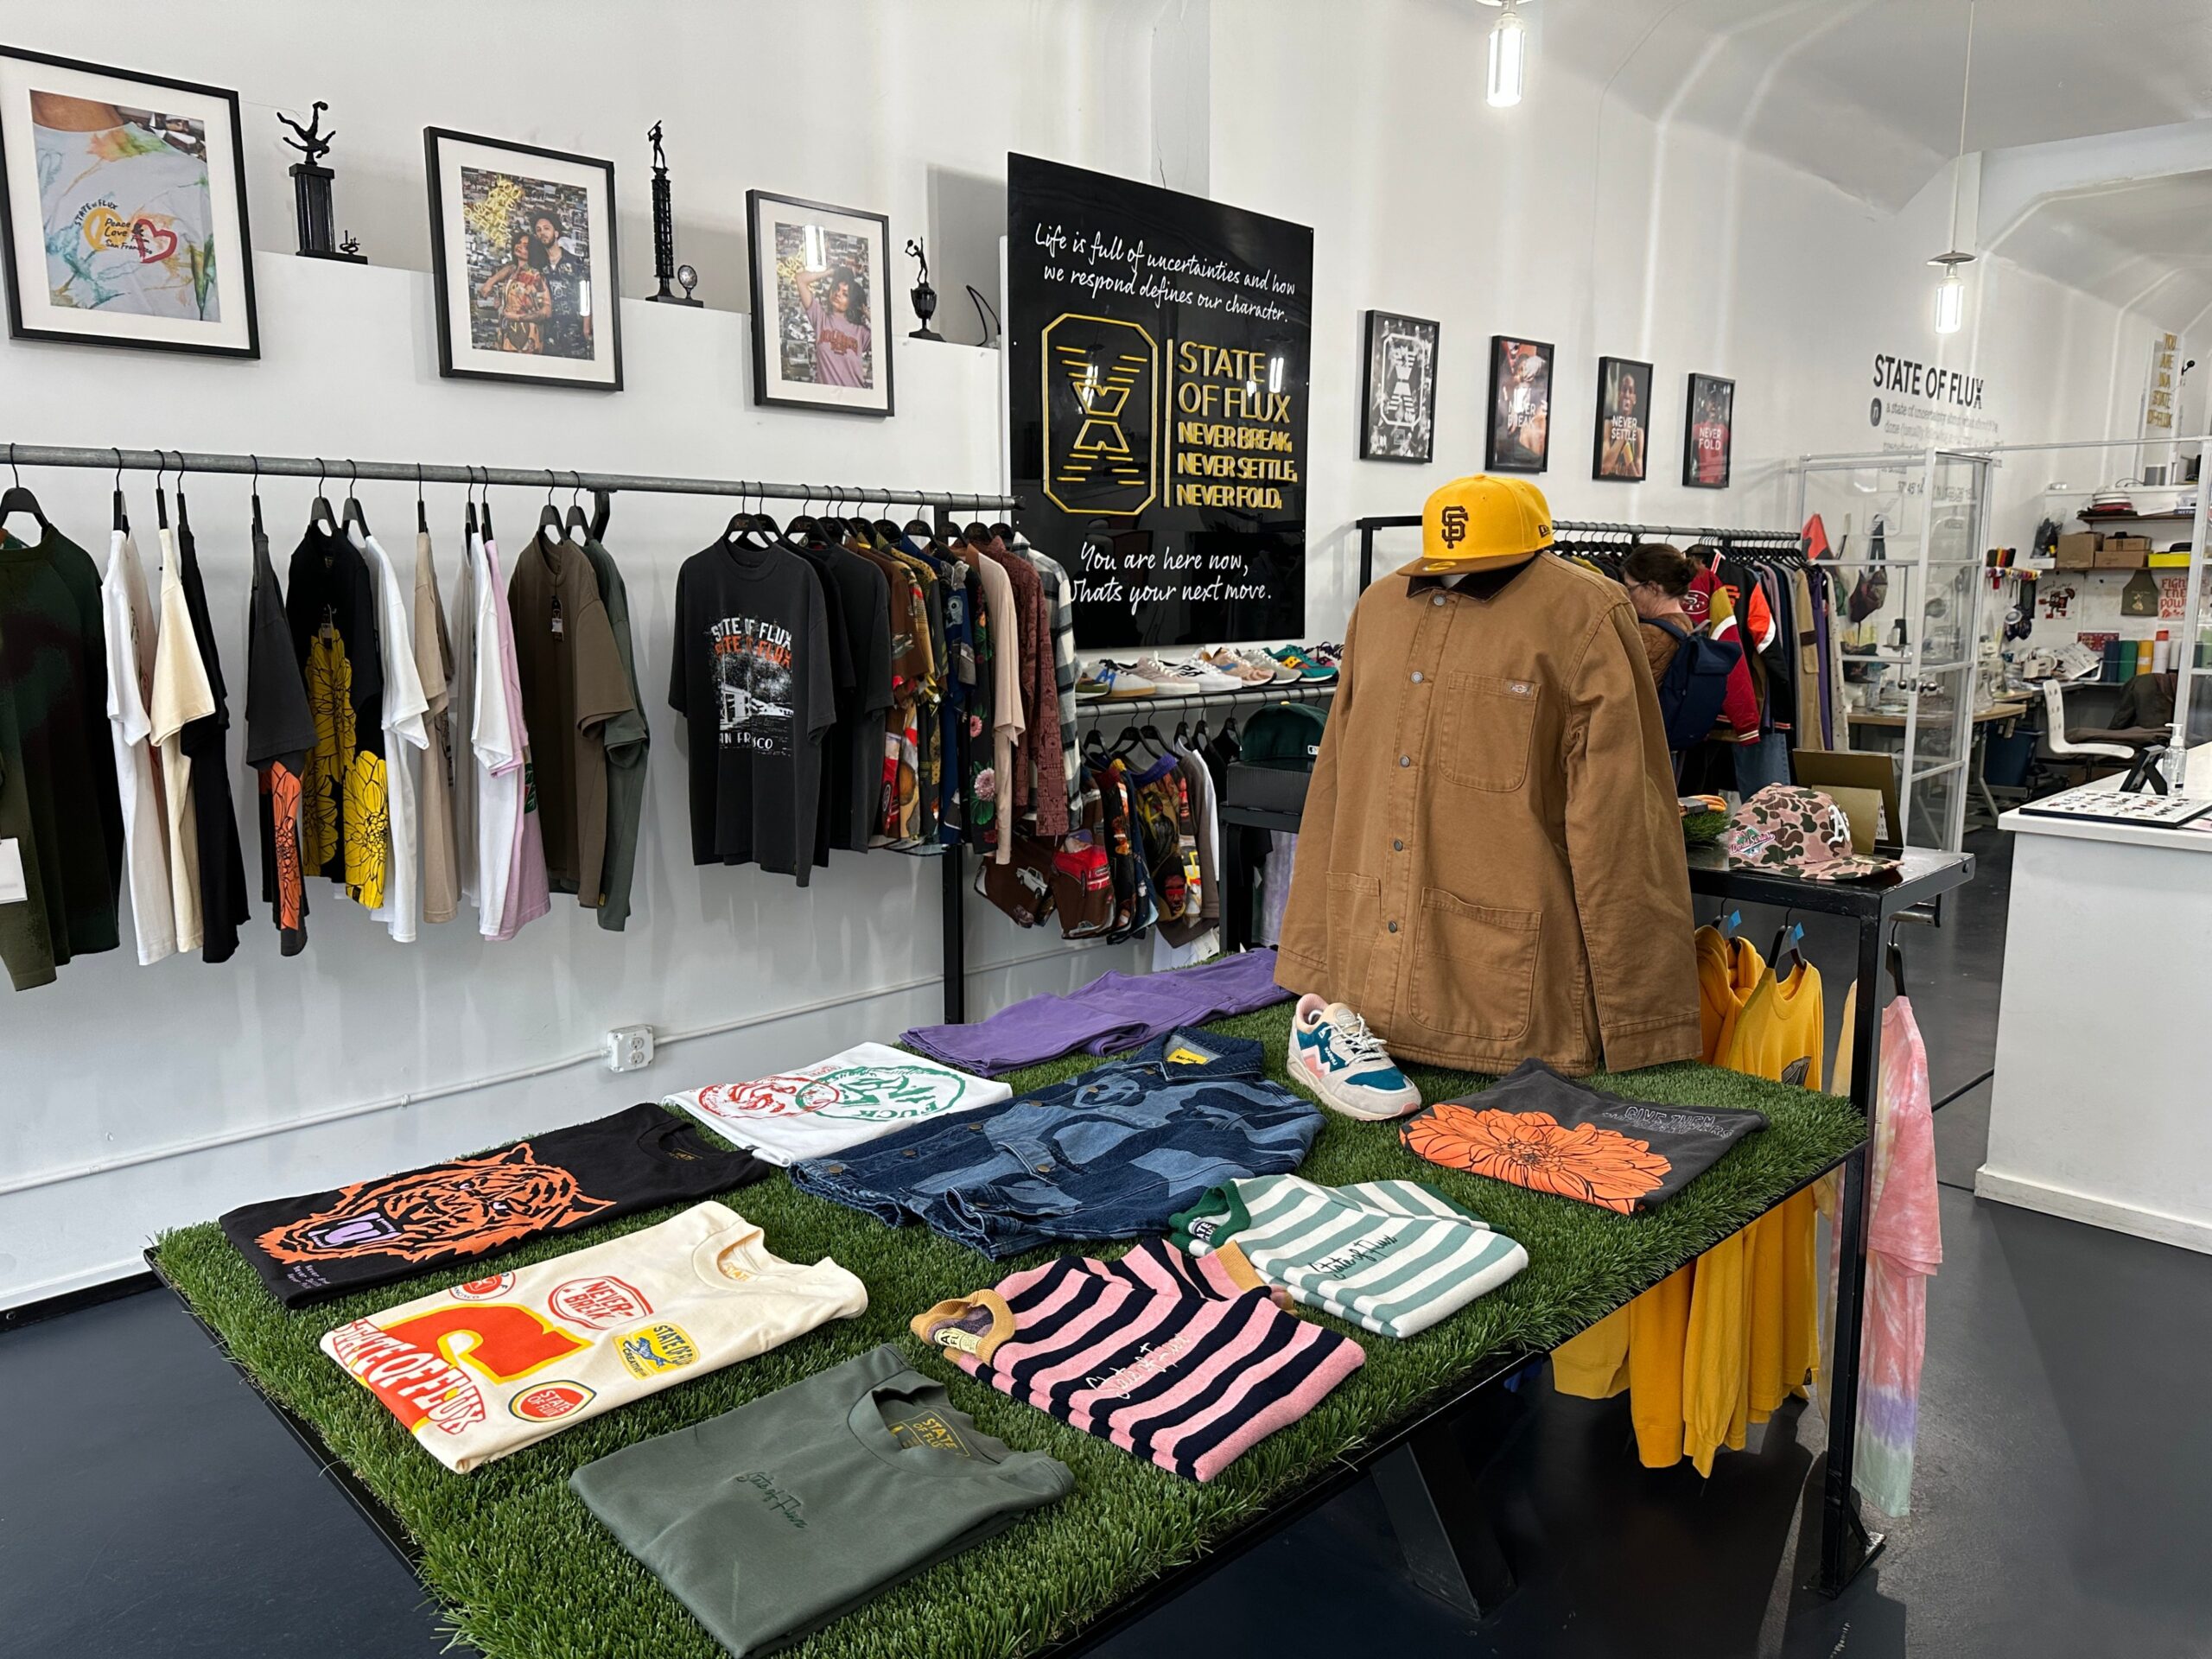 Graphic tees lay on a display in a men's clothing shop filled with racks and a mannequin topped by a yellow SF baseball cap.